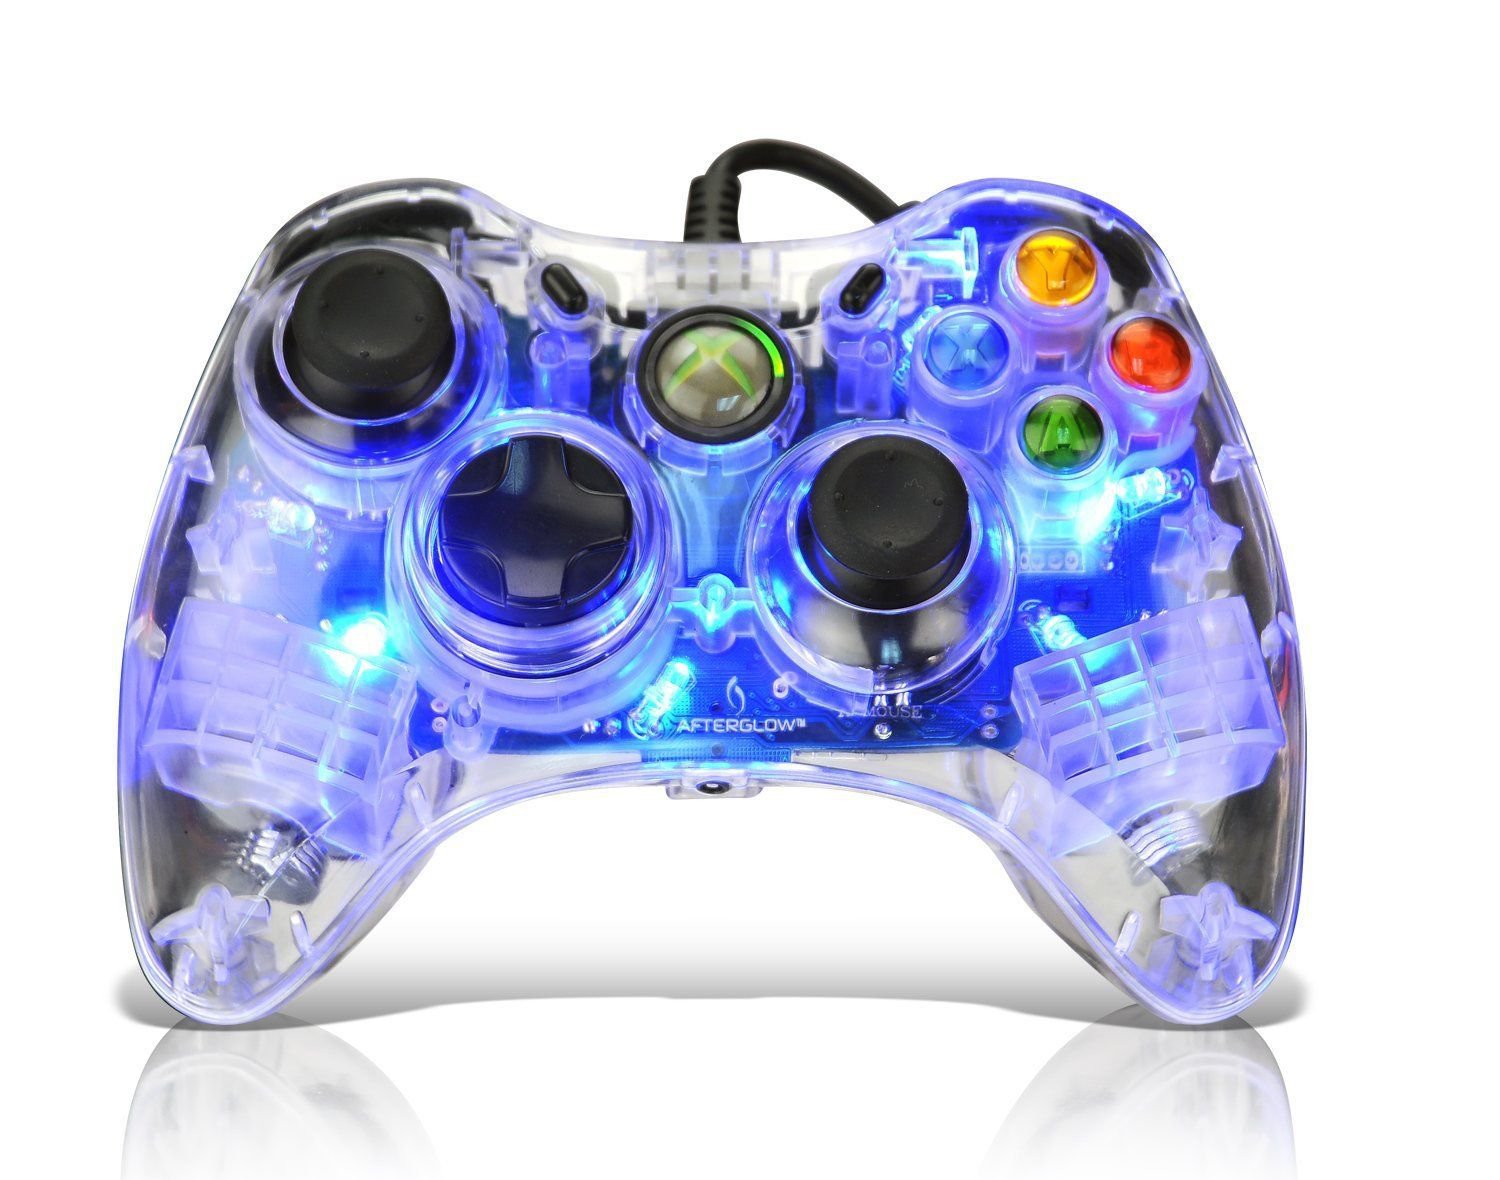 Afterglow Wired Controller for Xbox 360 - Blue Officially Licensed